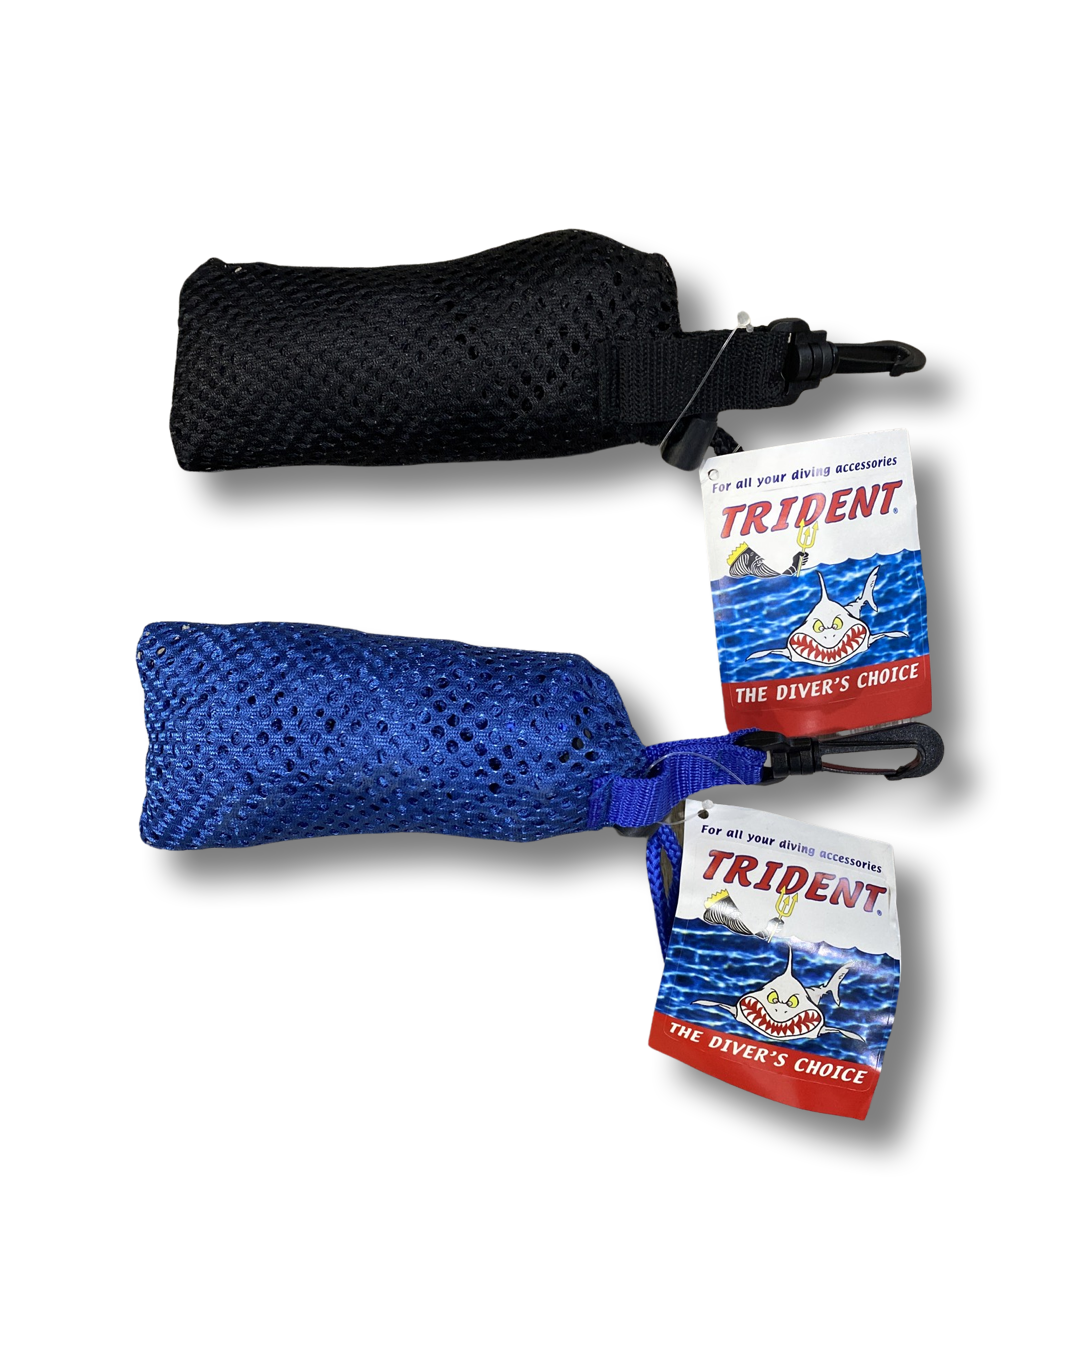 Trident Mesh Bag in a Bag for Divers